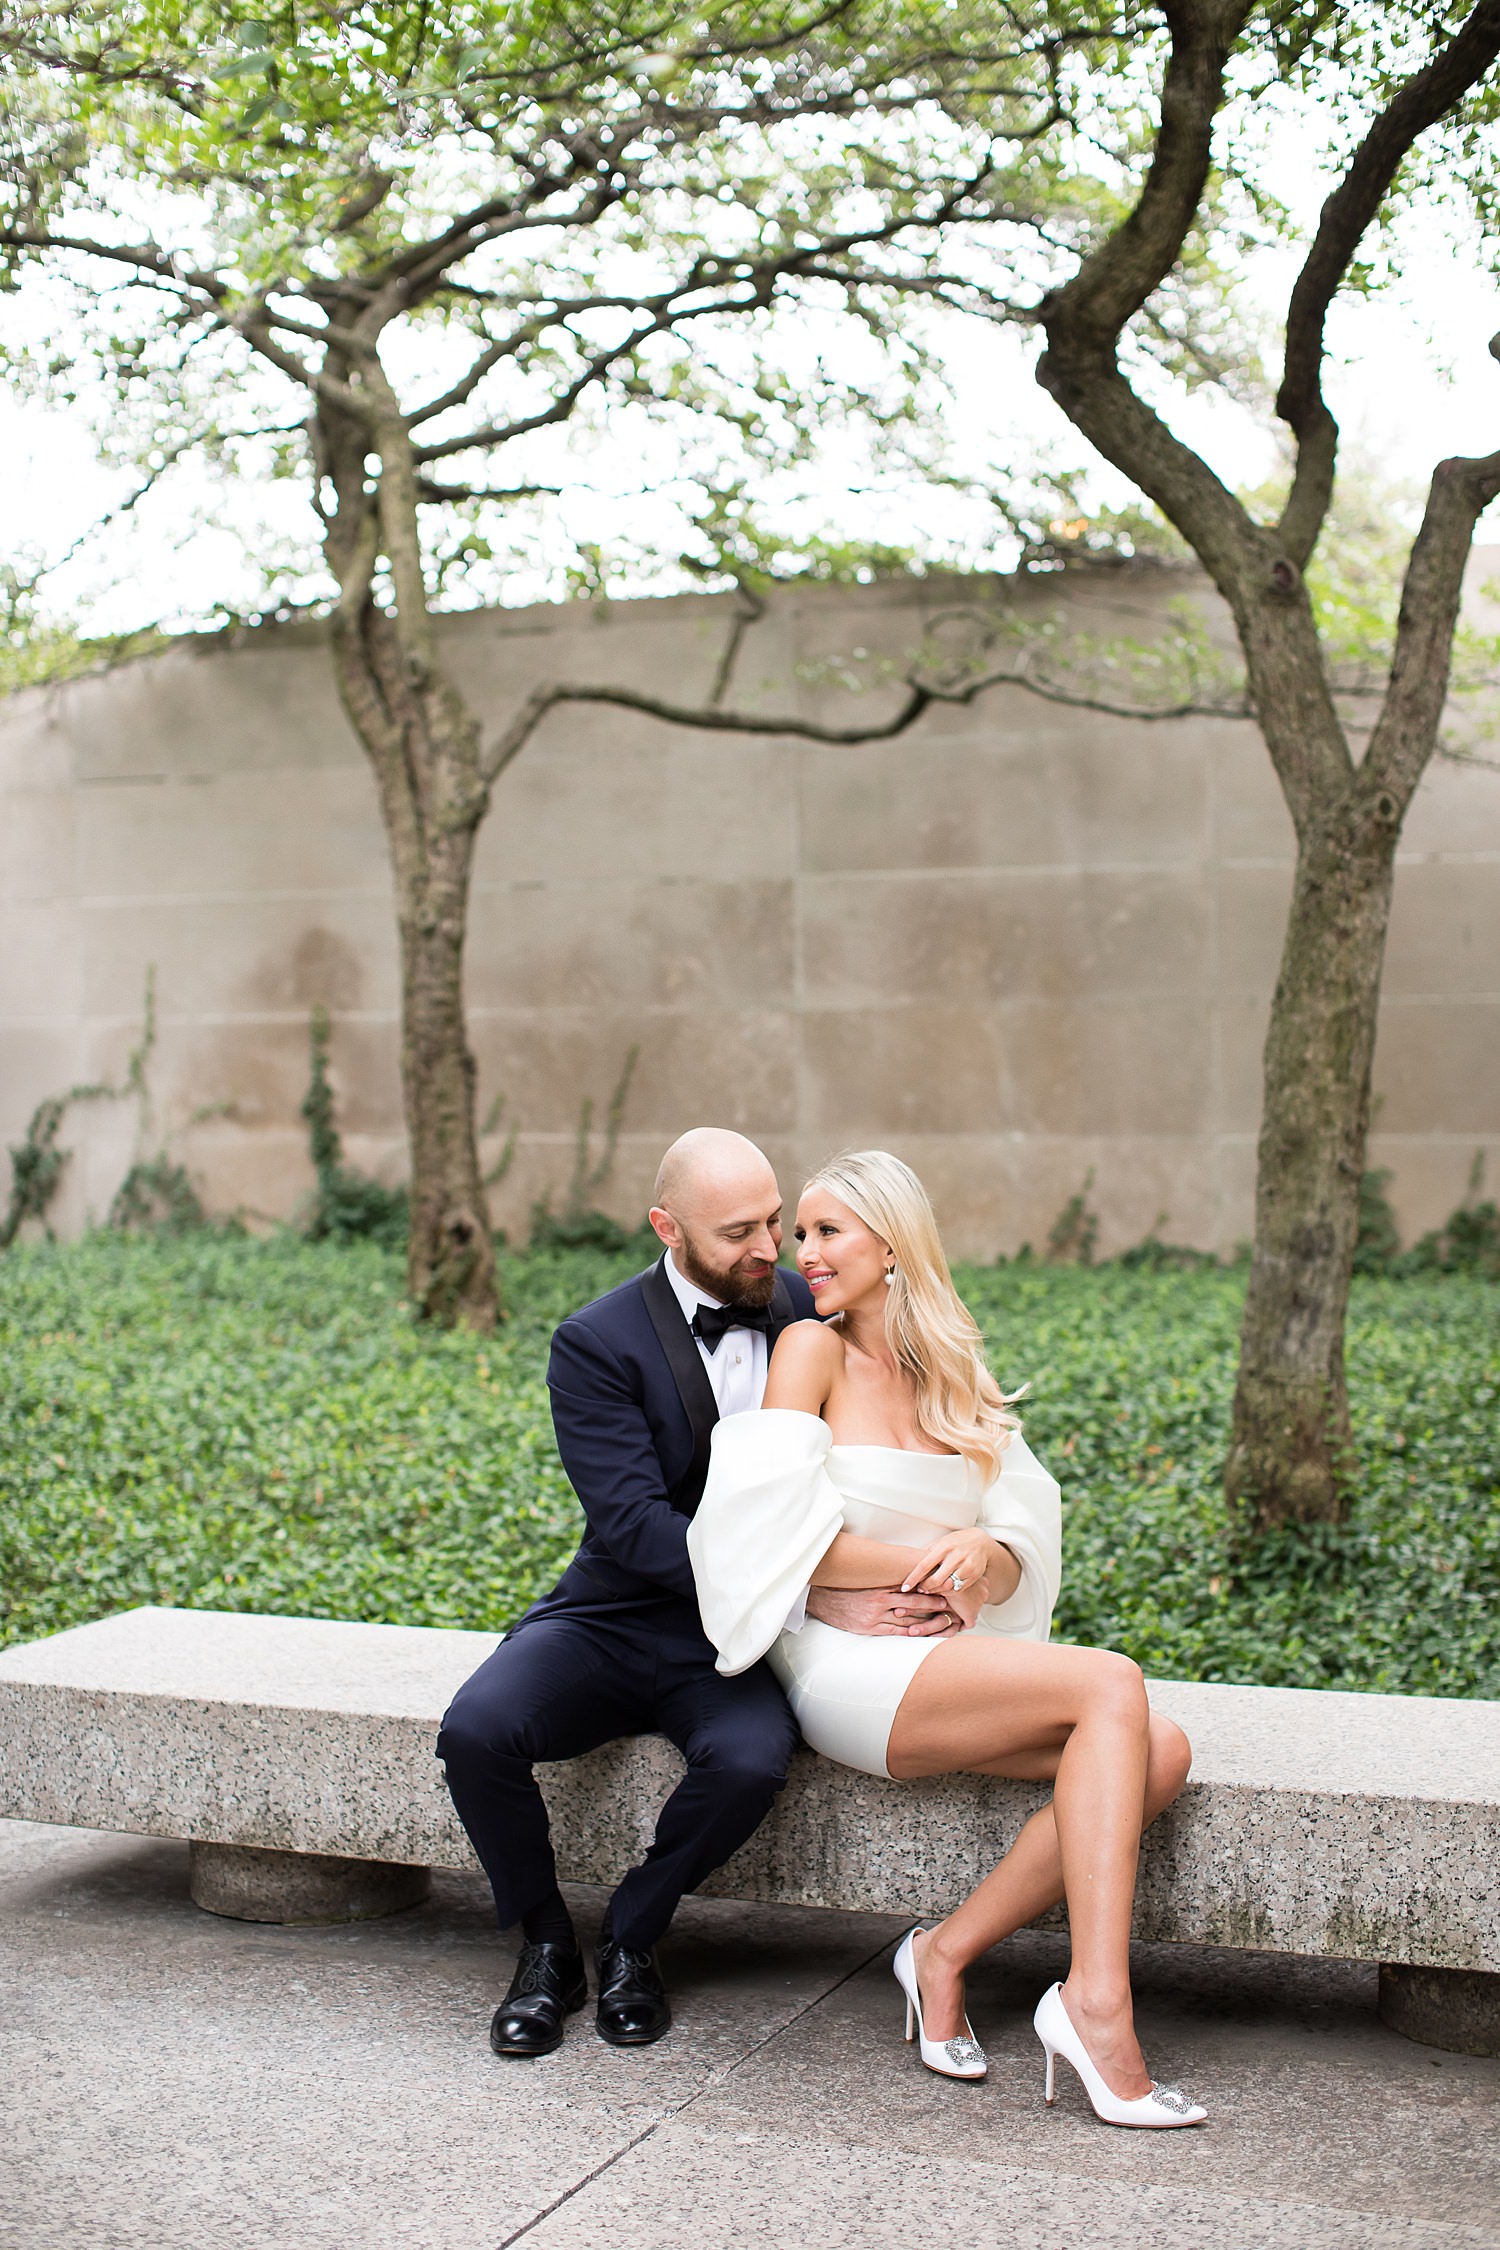 Chicago elopement photos at the Art Institute of Chicago south garden